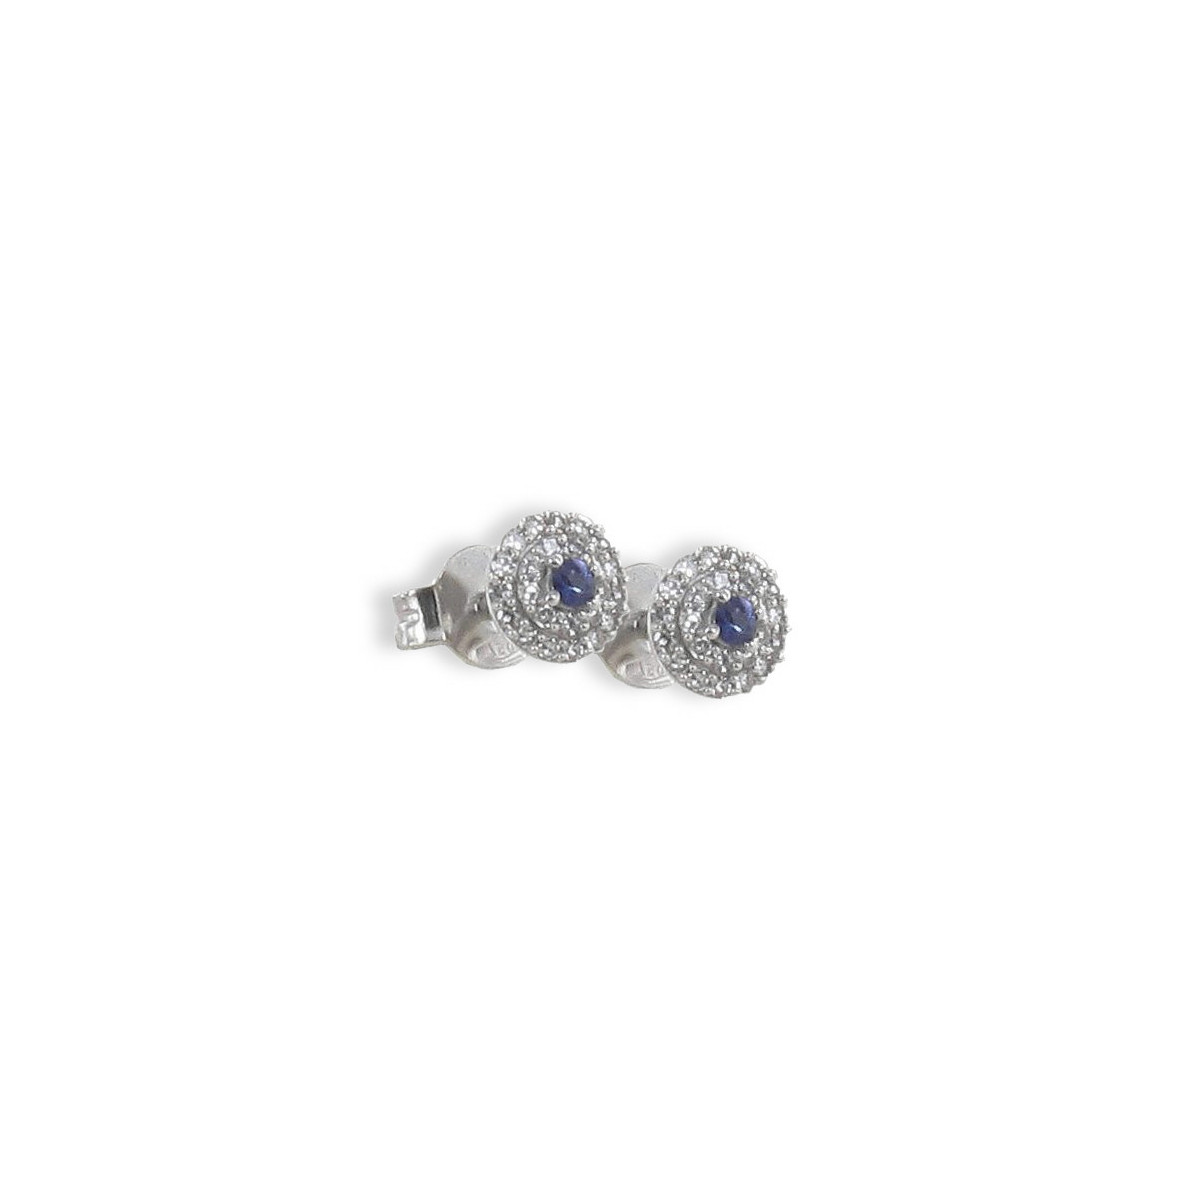 EARRINGS WITH SAPPHIRE AND DIAMONDS